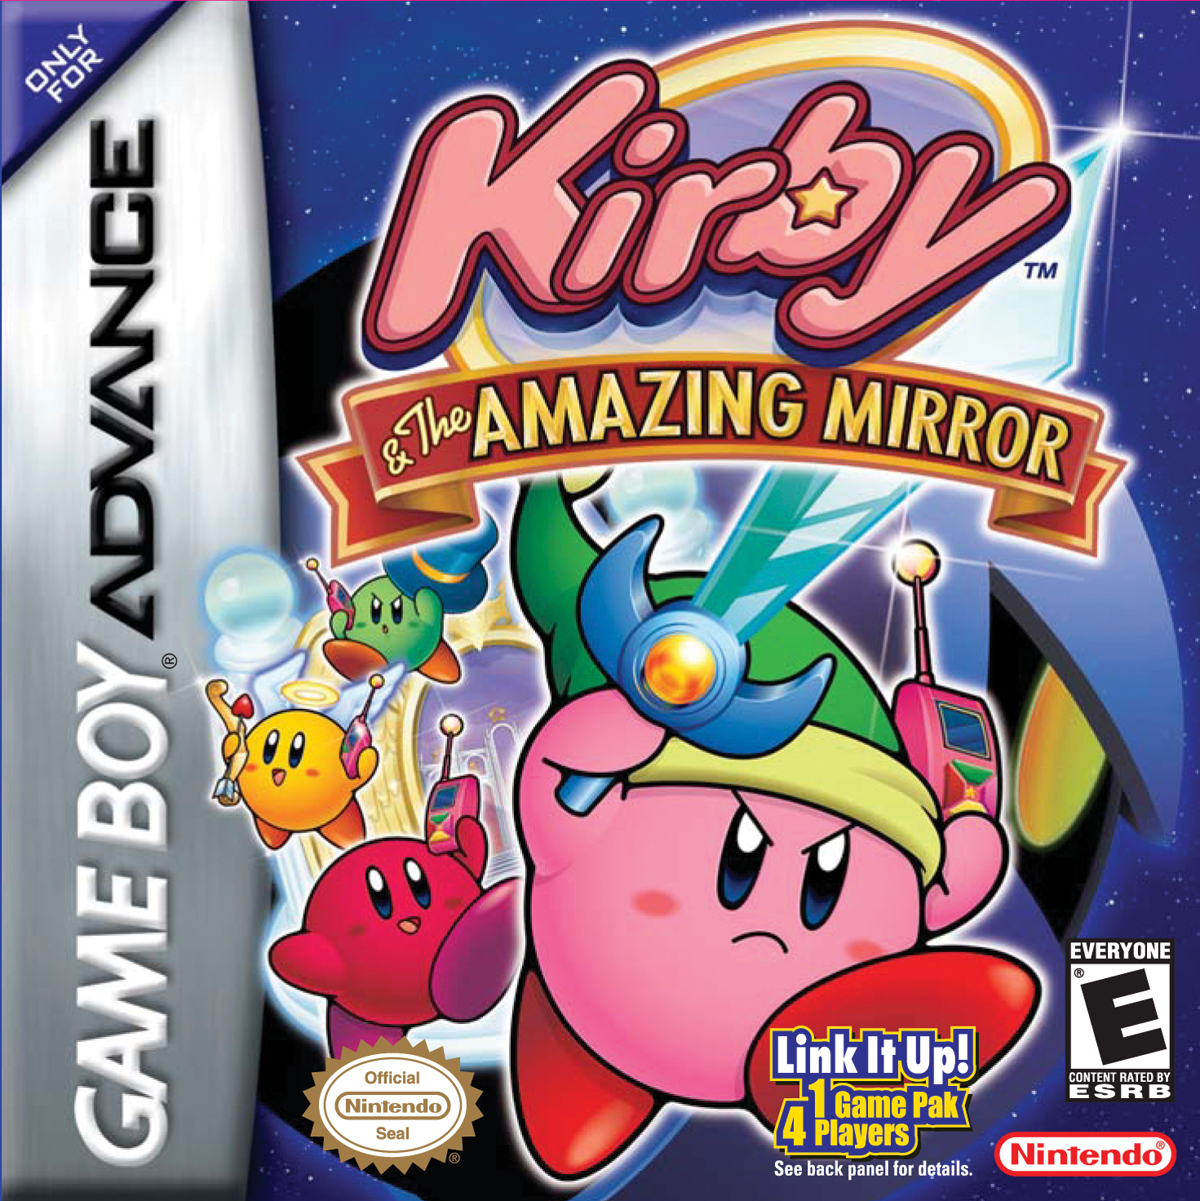 kirby-the-amazing-mirror-strategywiki-strategy-guide-and-game-reference-wiki